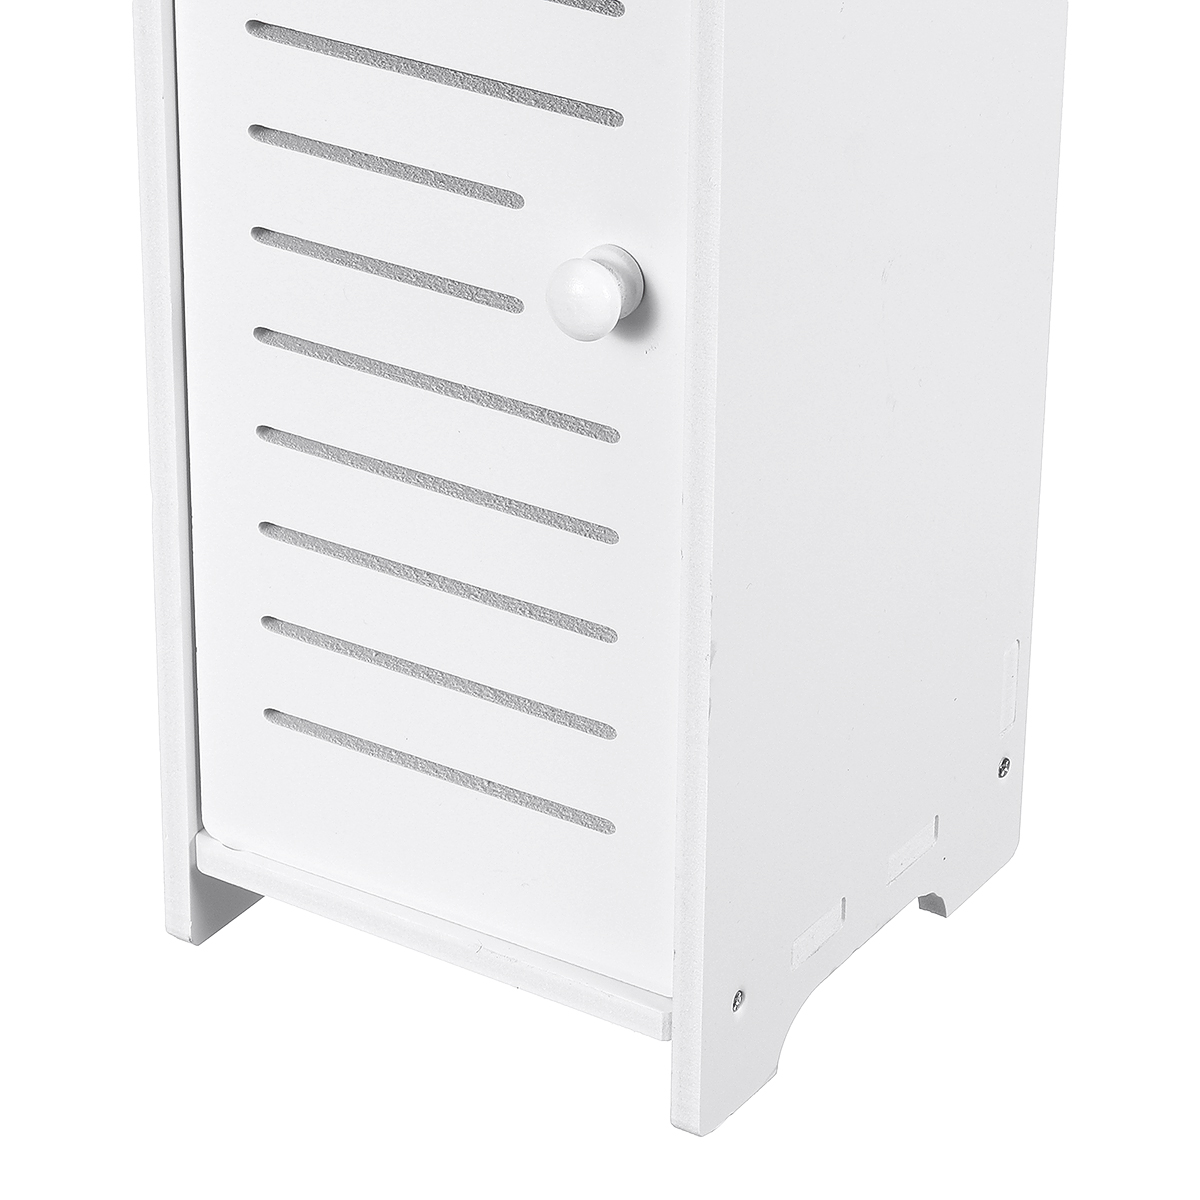 Find 1PC Bathroom Side Cabinets Side Cabinets Racks Bathroom Floor Storage Cabinets Gap Storage Cabinets for Sale on Gipsybee.com with cryptocurrencies